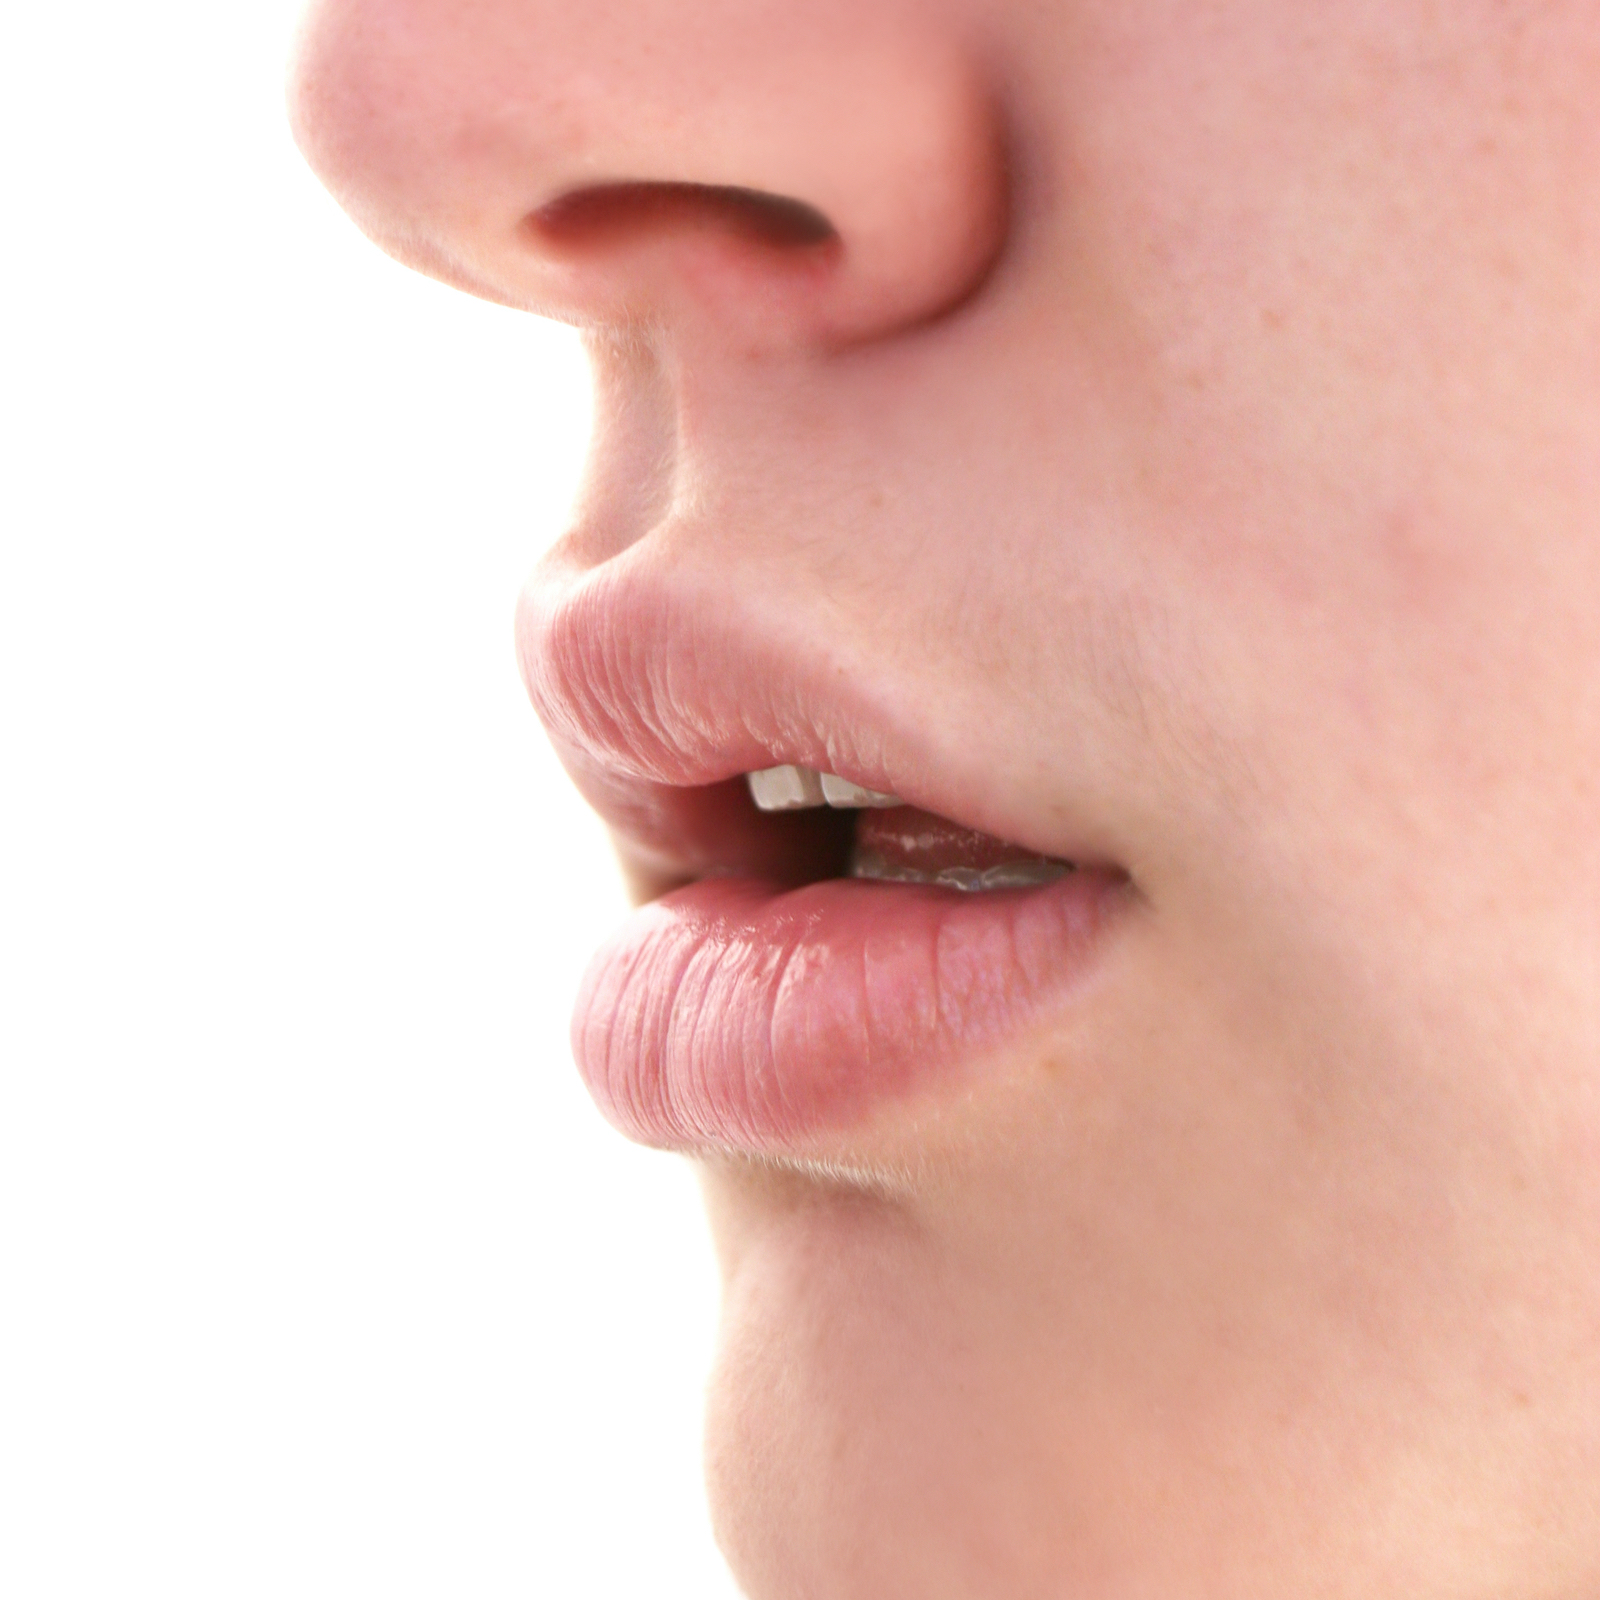 Body Language Experts Analyze What Your Lips Reveal About You